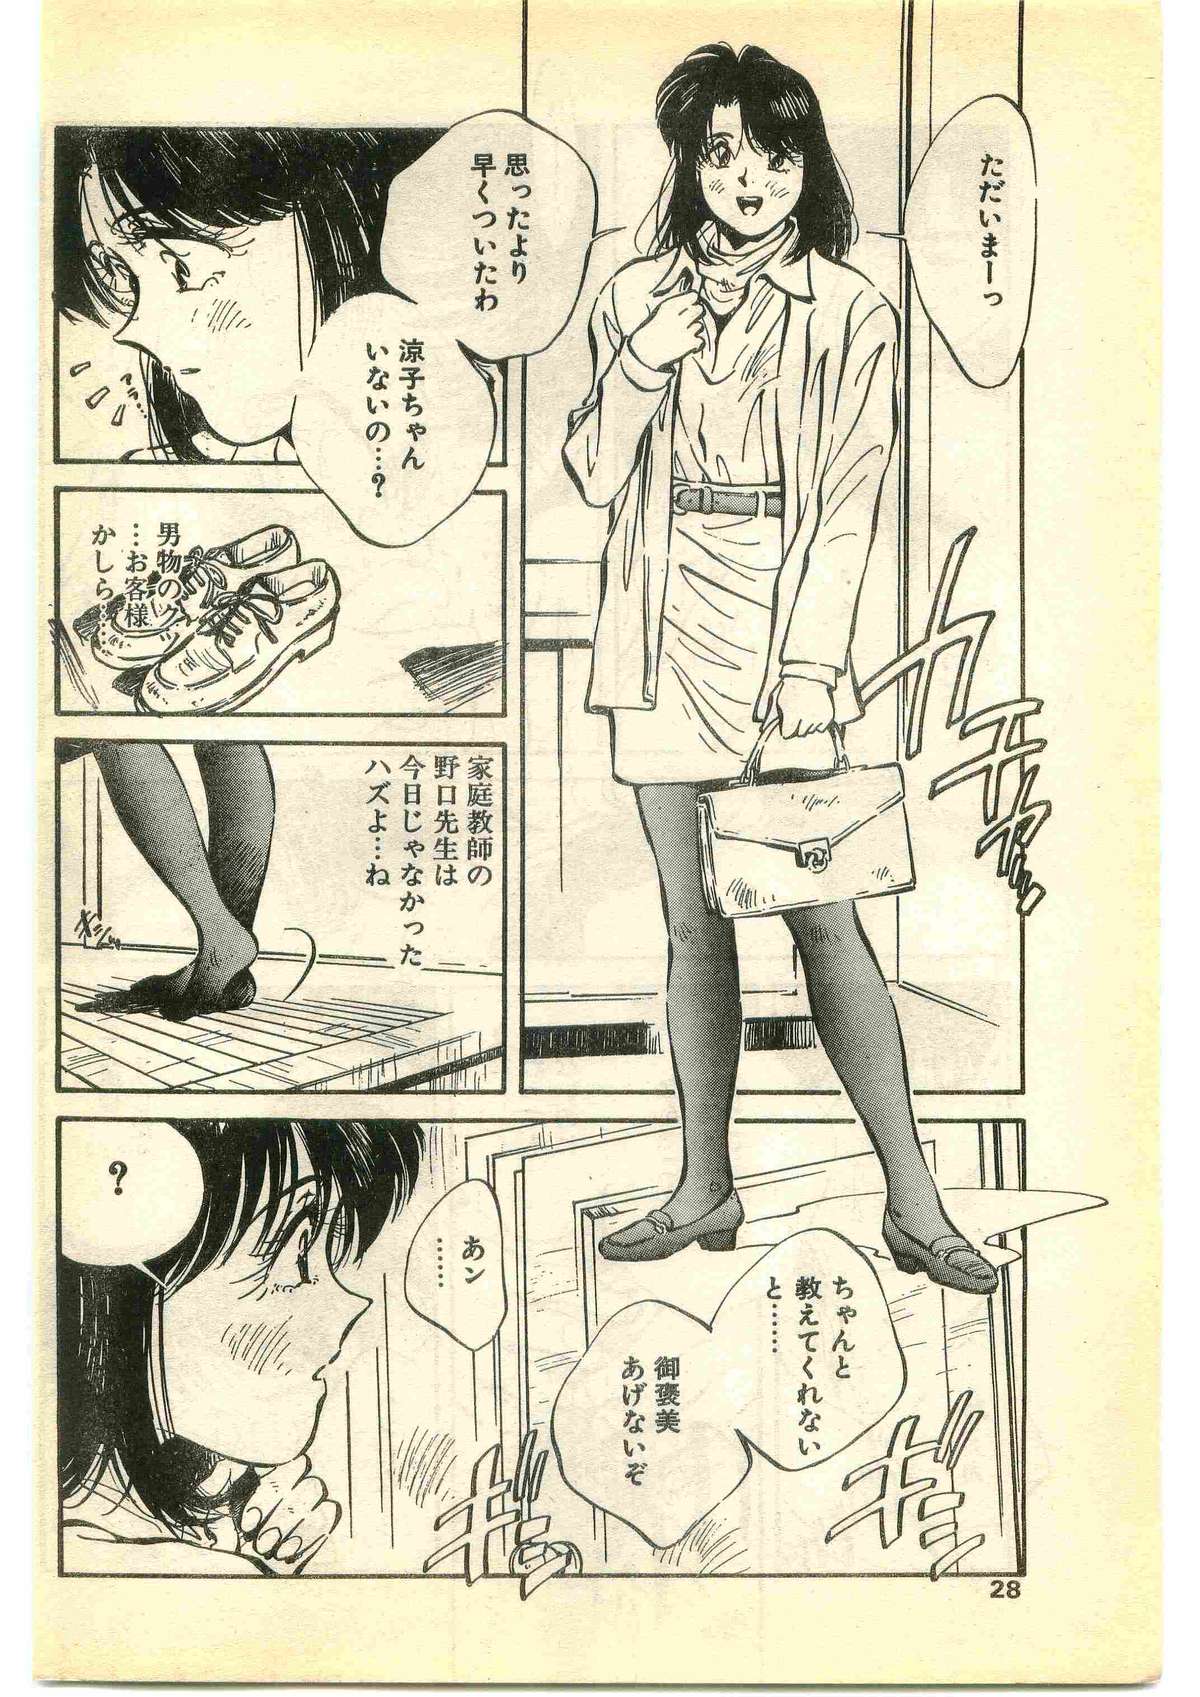 COMIC Papipo Gaiden 1995-01 page 28 full